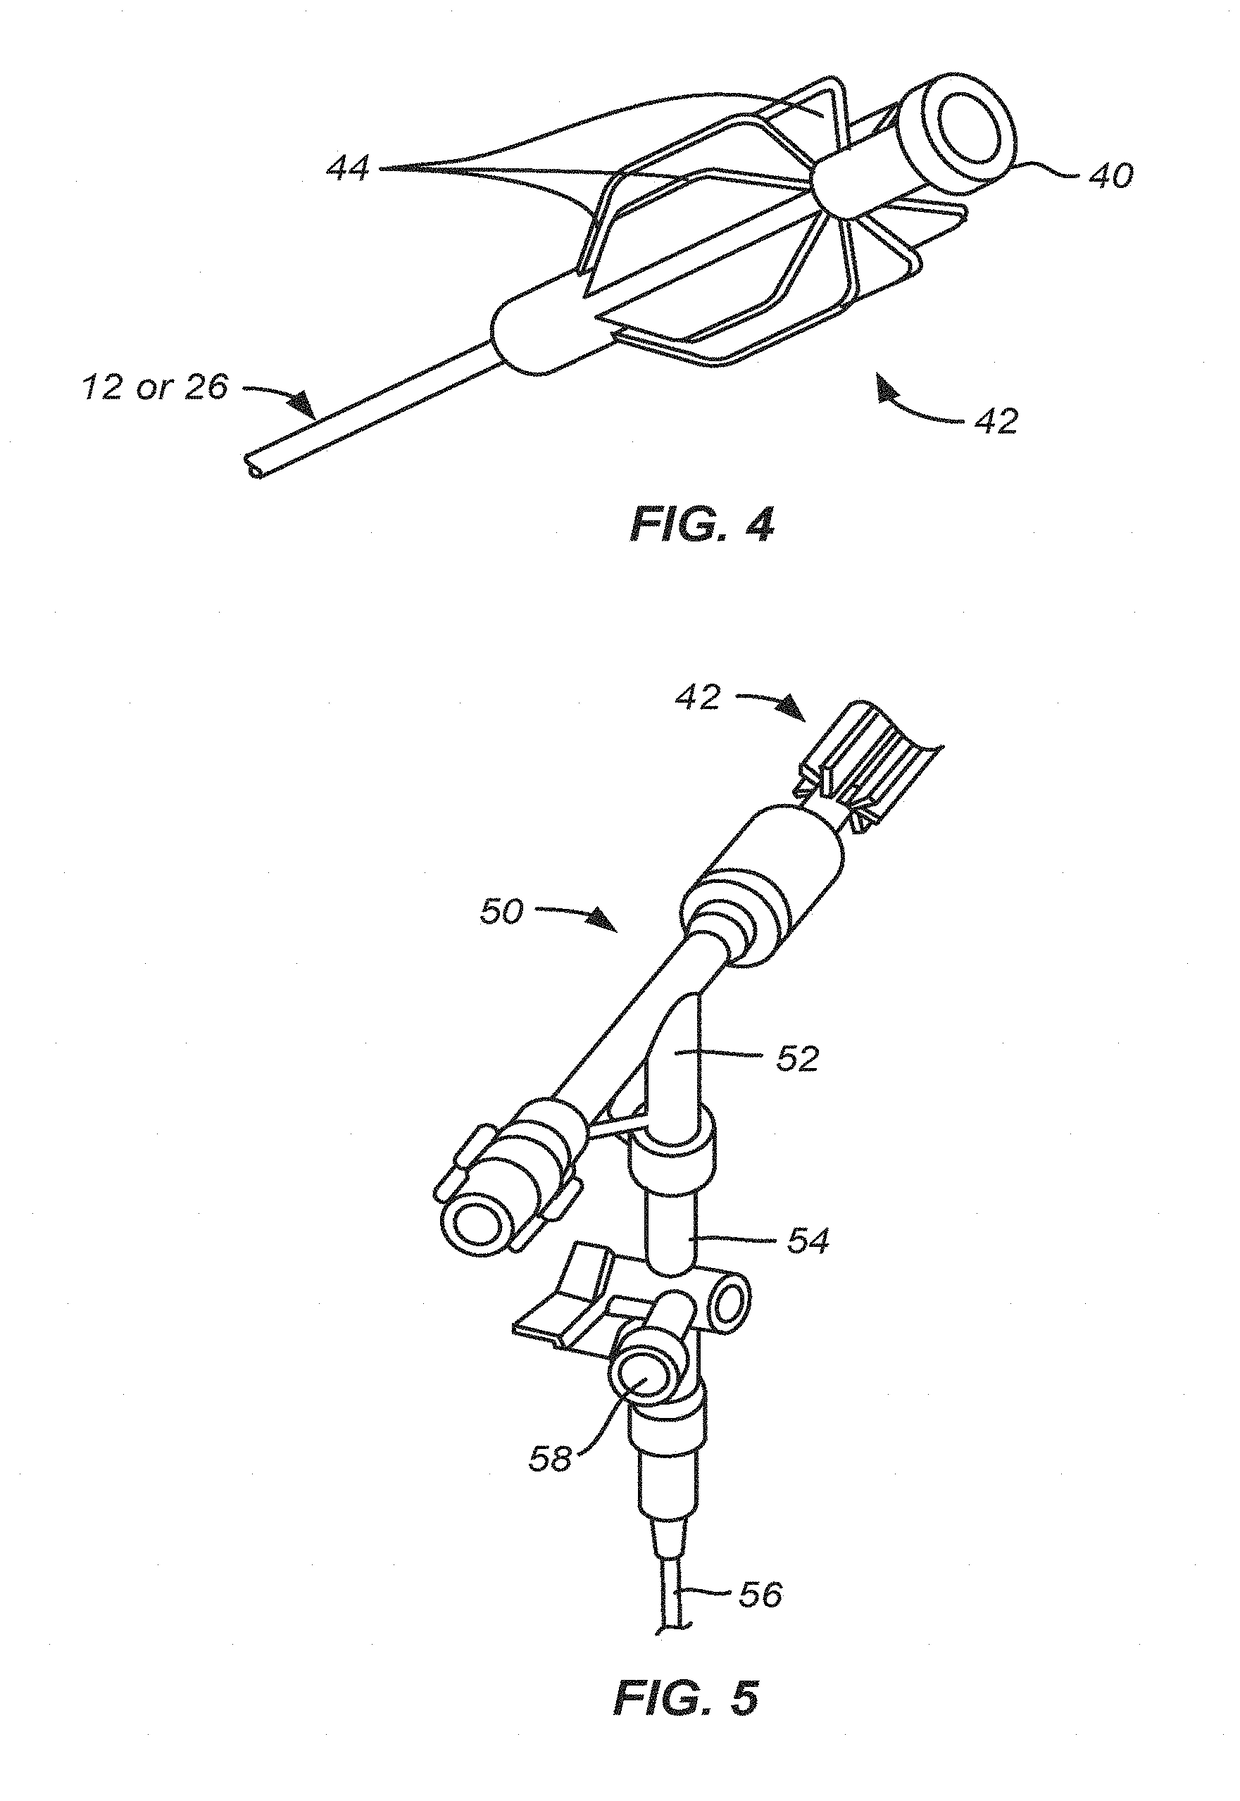 Delivery catheter with fixed guidewire and beveled elliptical port